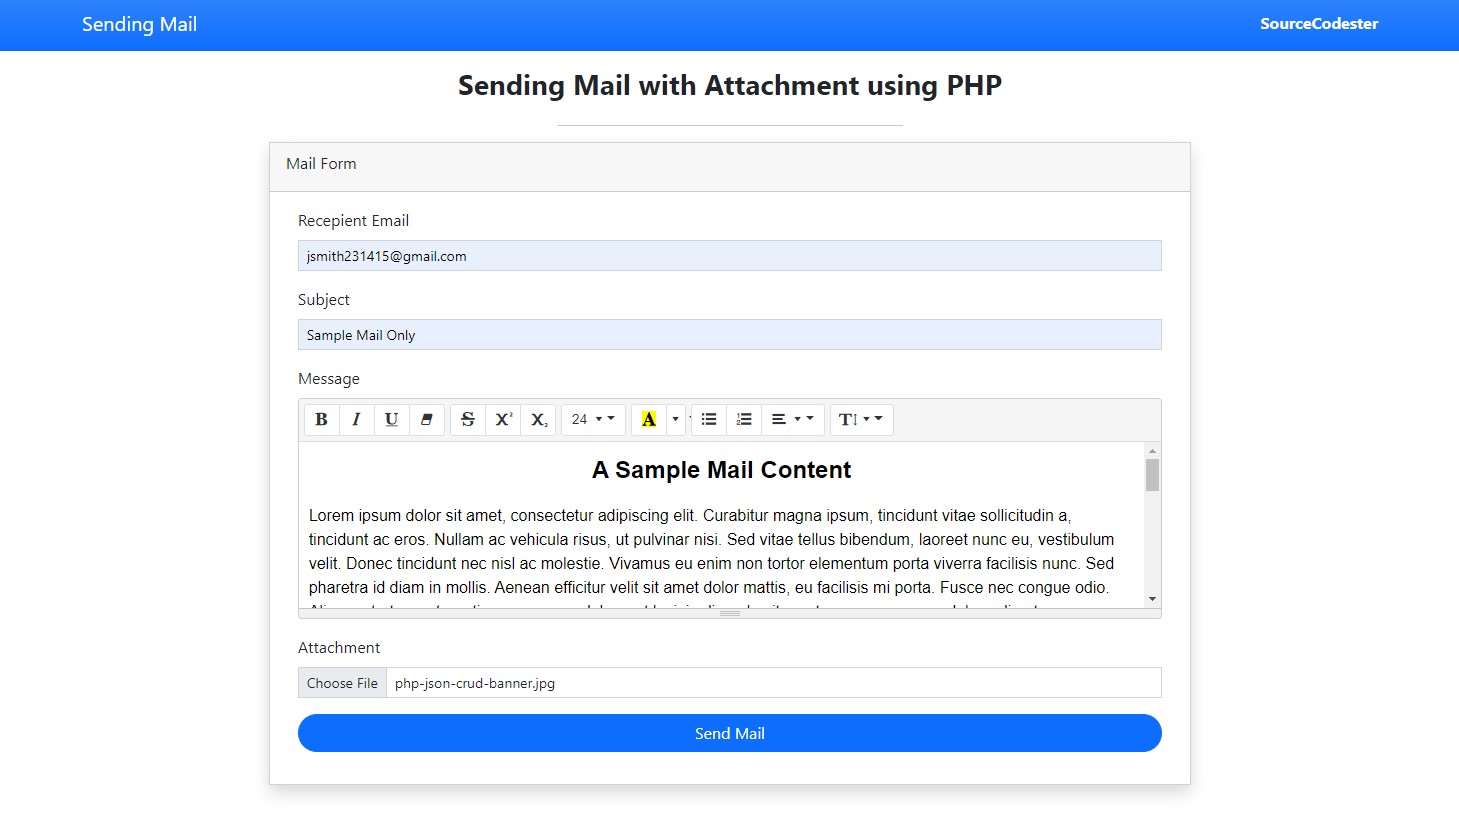 Sending an HTML with Attachement Mail using PHP